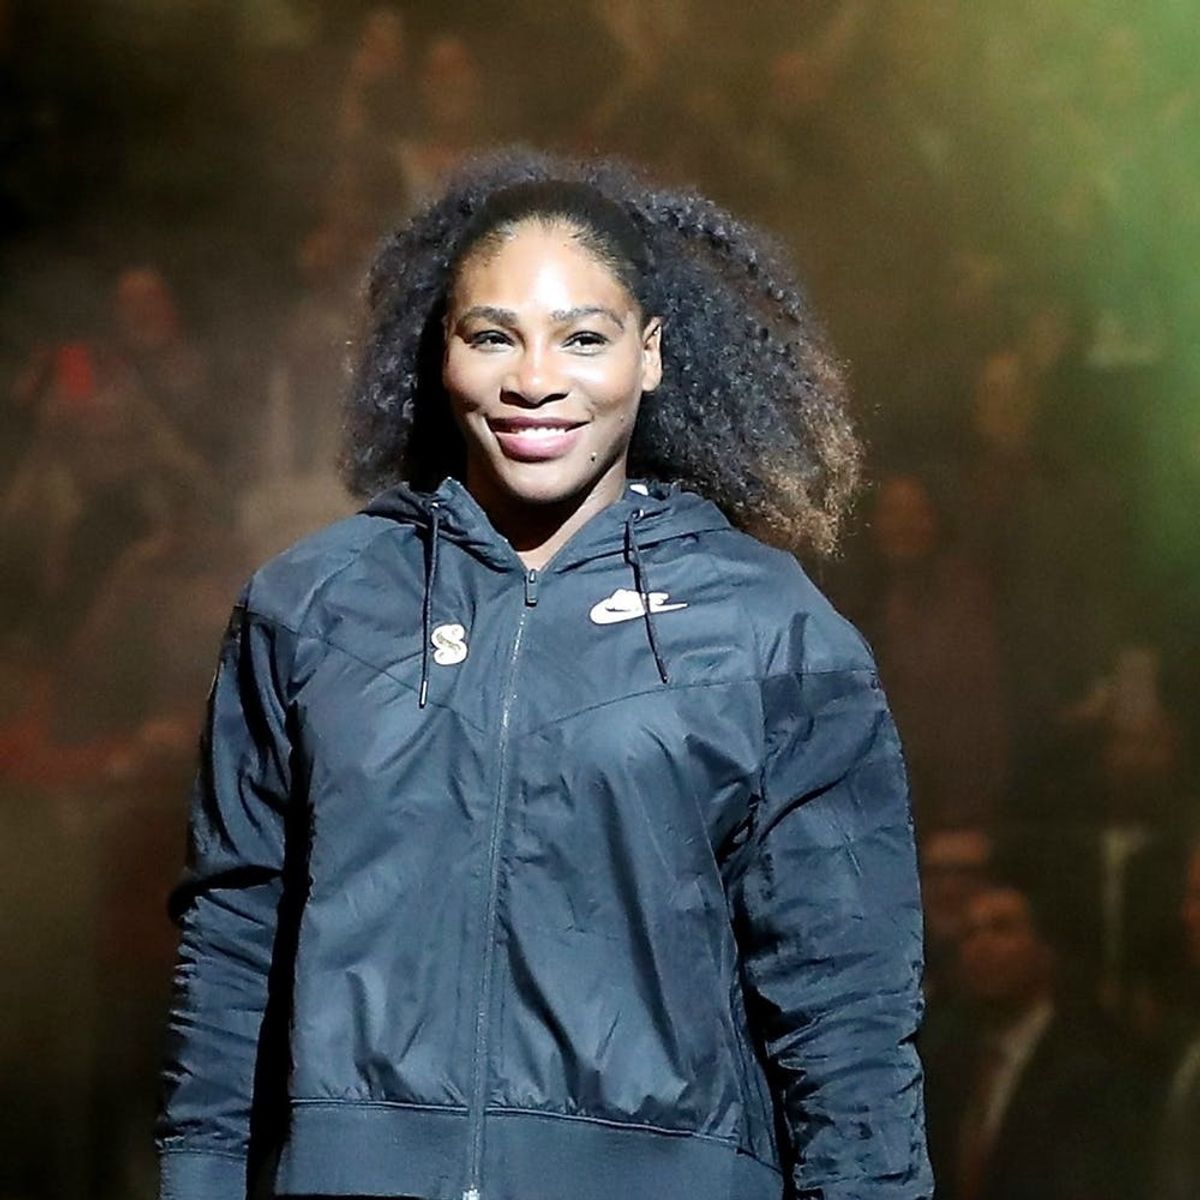 Serena Williams Says the Medical System Is Shortchanging Black Women